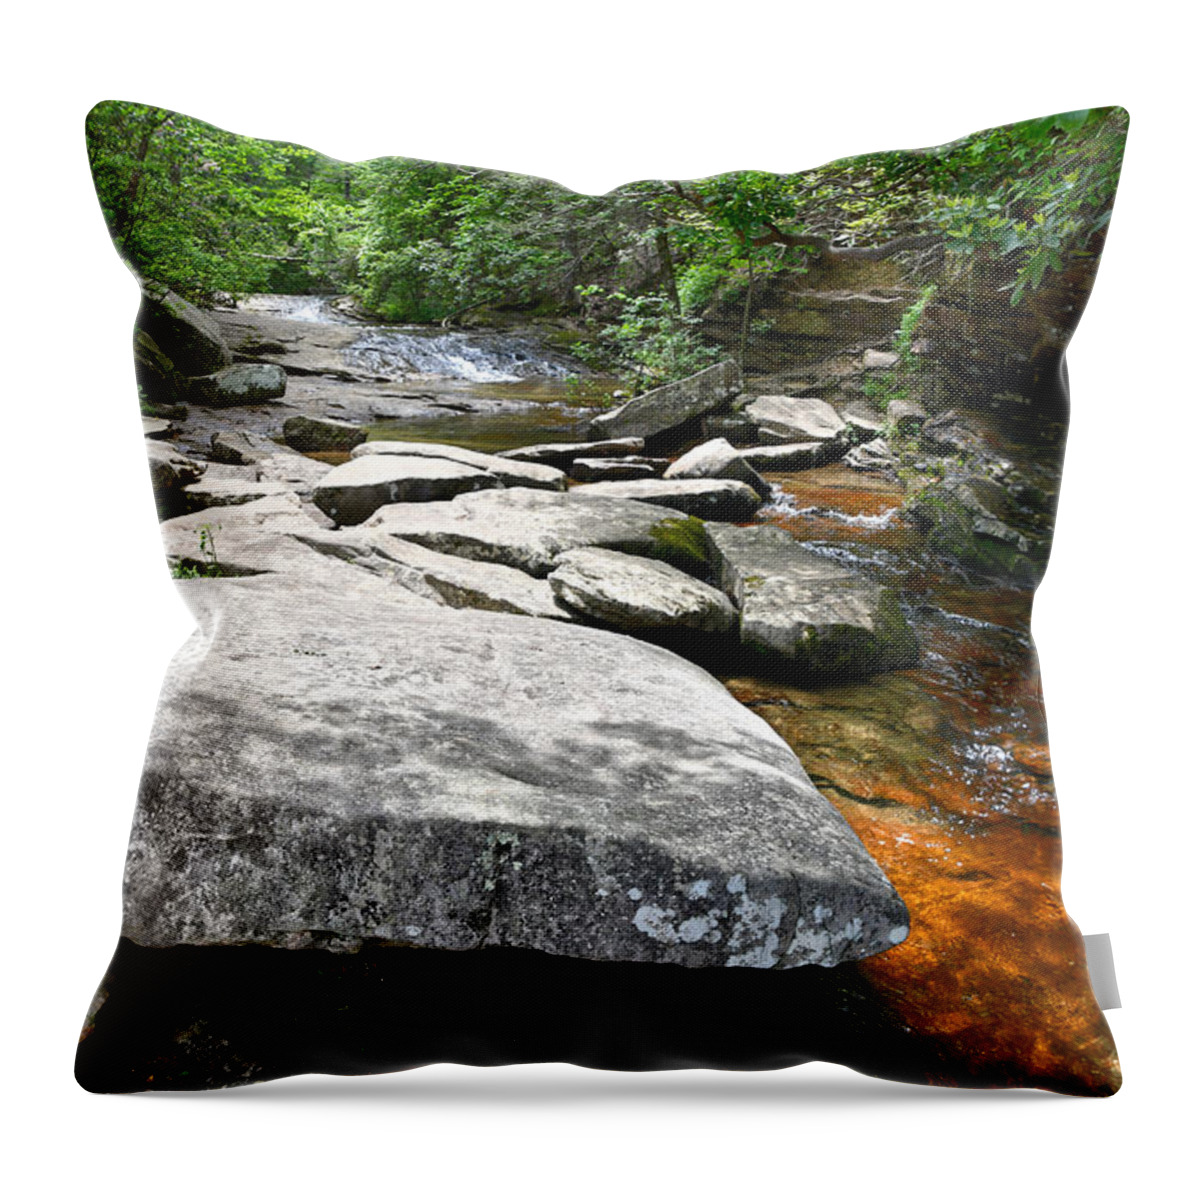 Falling Water Falls Throw Pillow featuring the photograph Falling Water Falls 4 by Phil Perkins